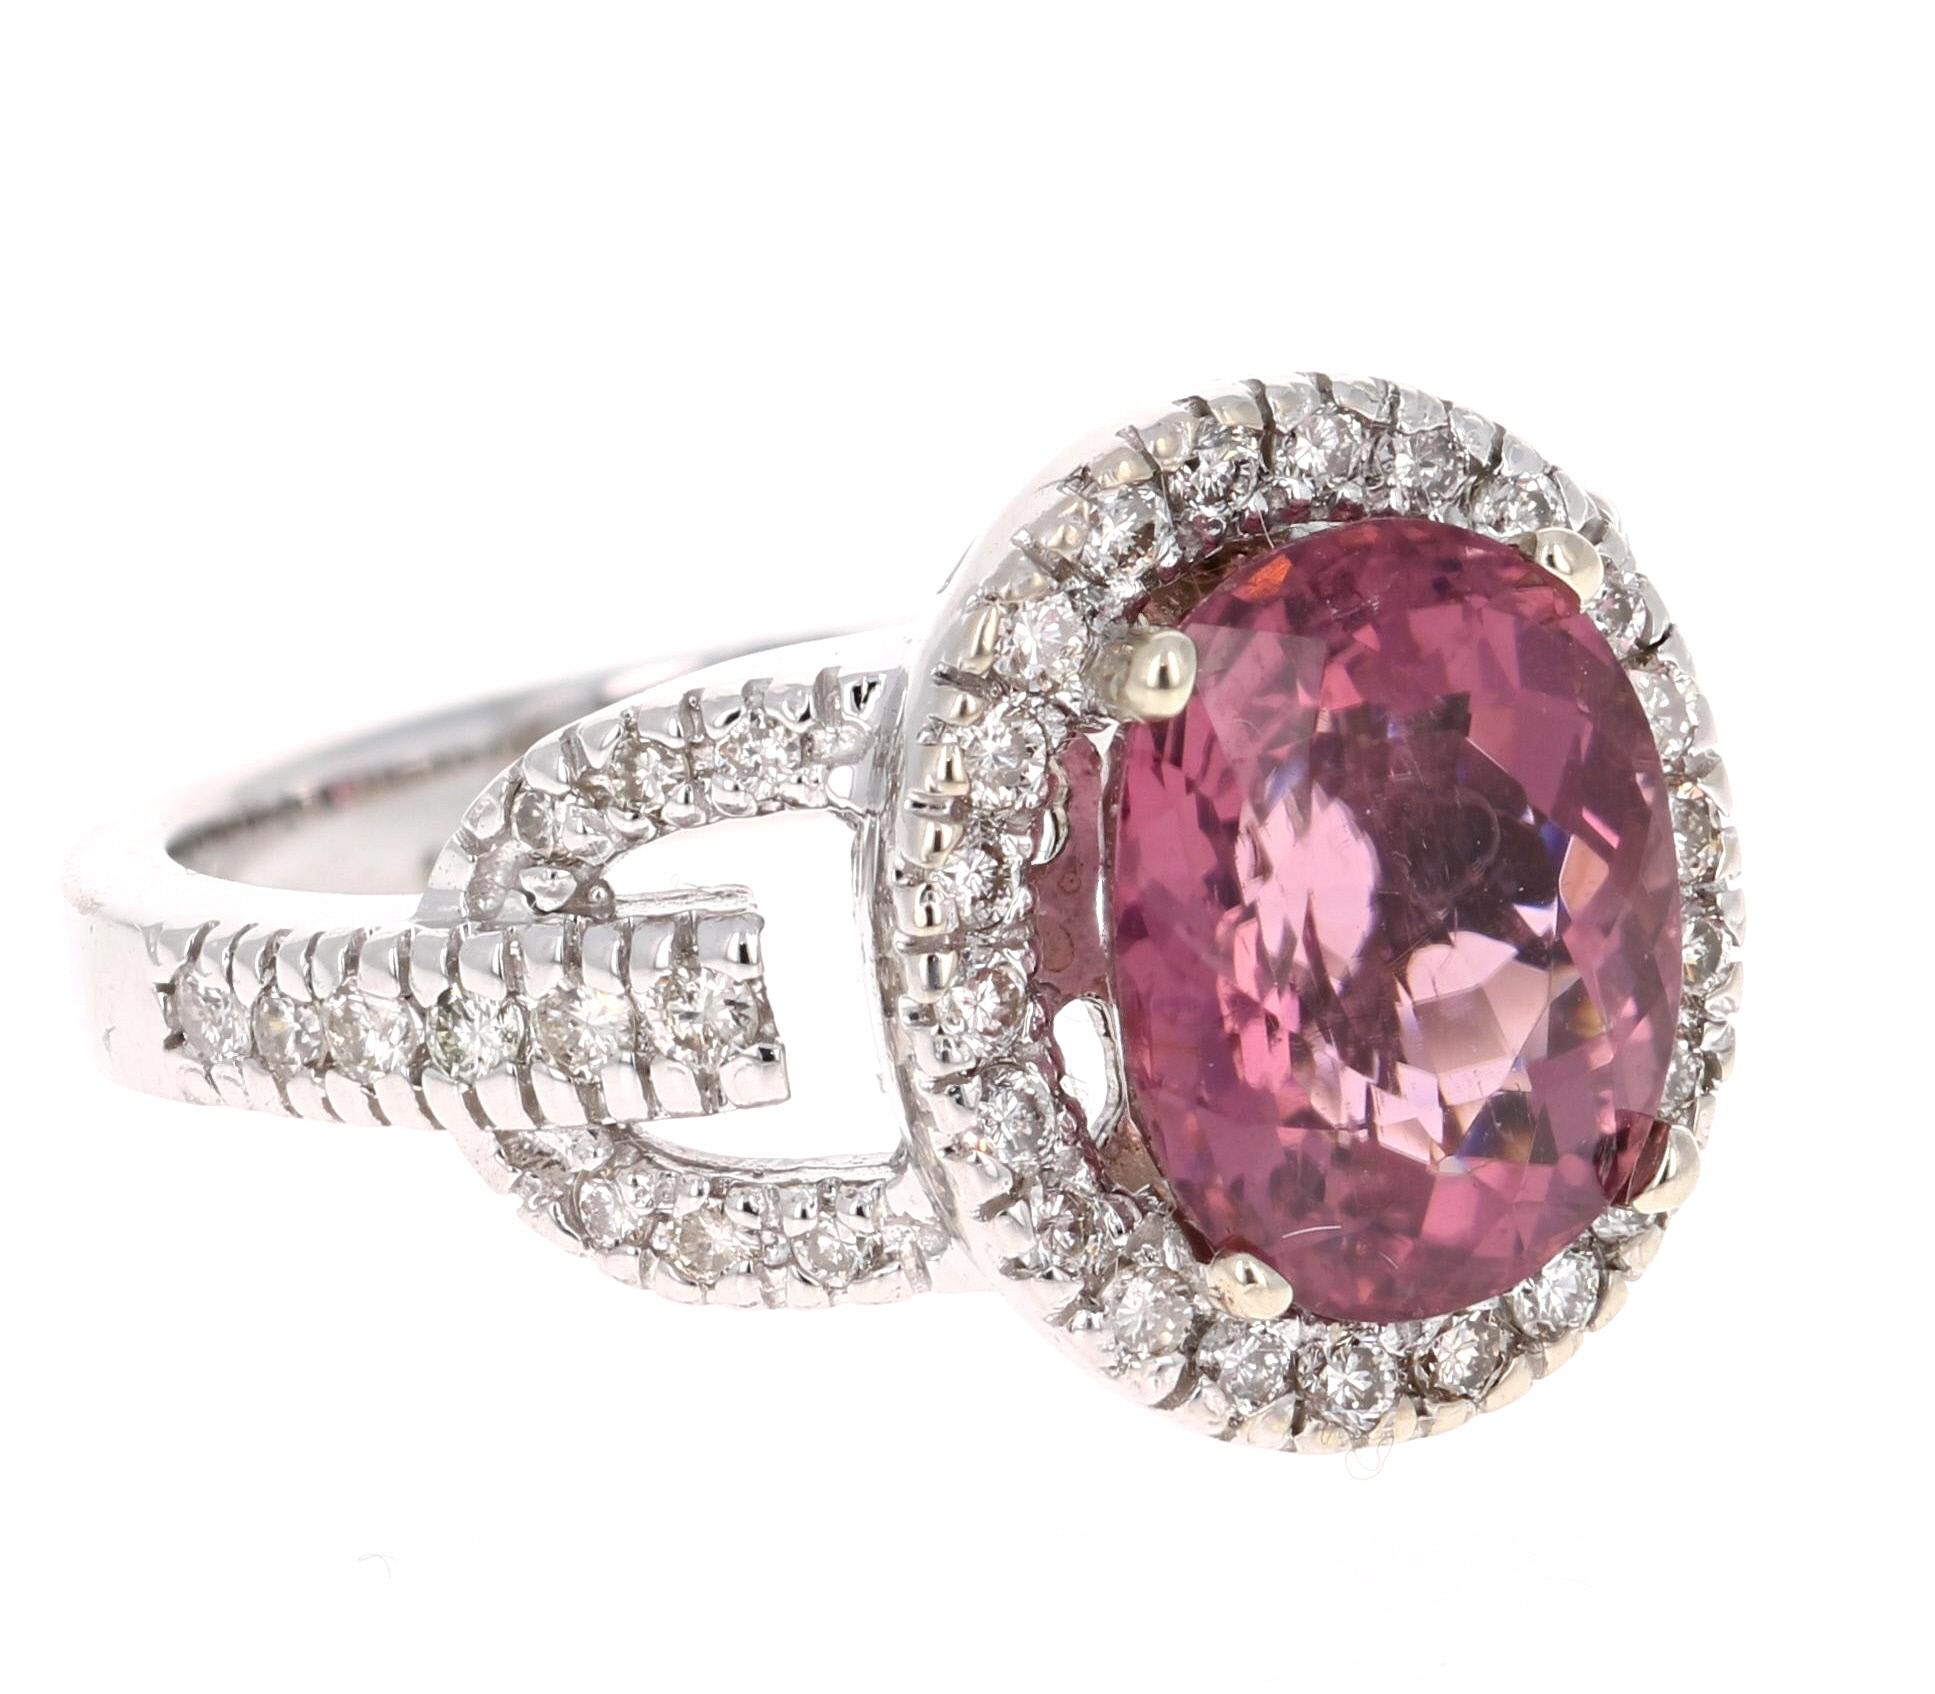 Super gorgeous 4.06 Carat Pink Tourmaline and Diamond 14K White Gold Cocktail Ring!

This ring has a 3.46 carat Oval Cut Tourmaline that is set in the center of the ring and is surrounded by 44 Round Cut Diamonds that weigh 0.60 carats . The total